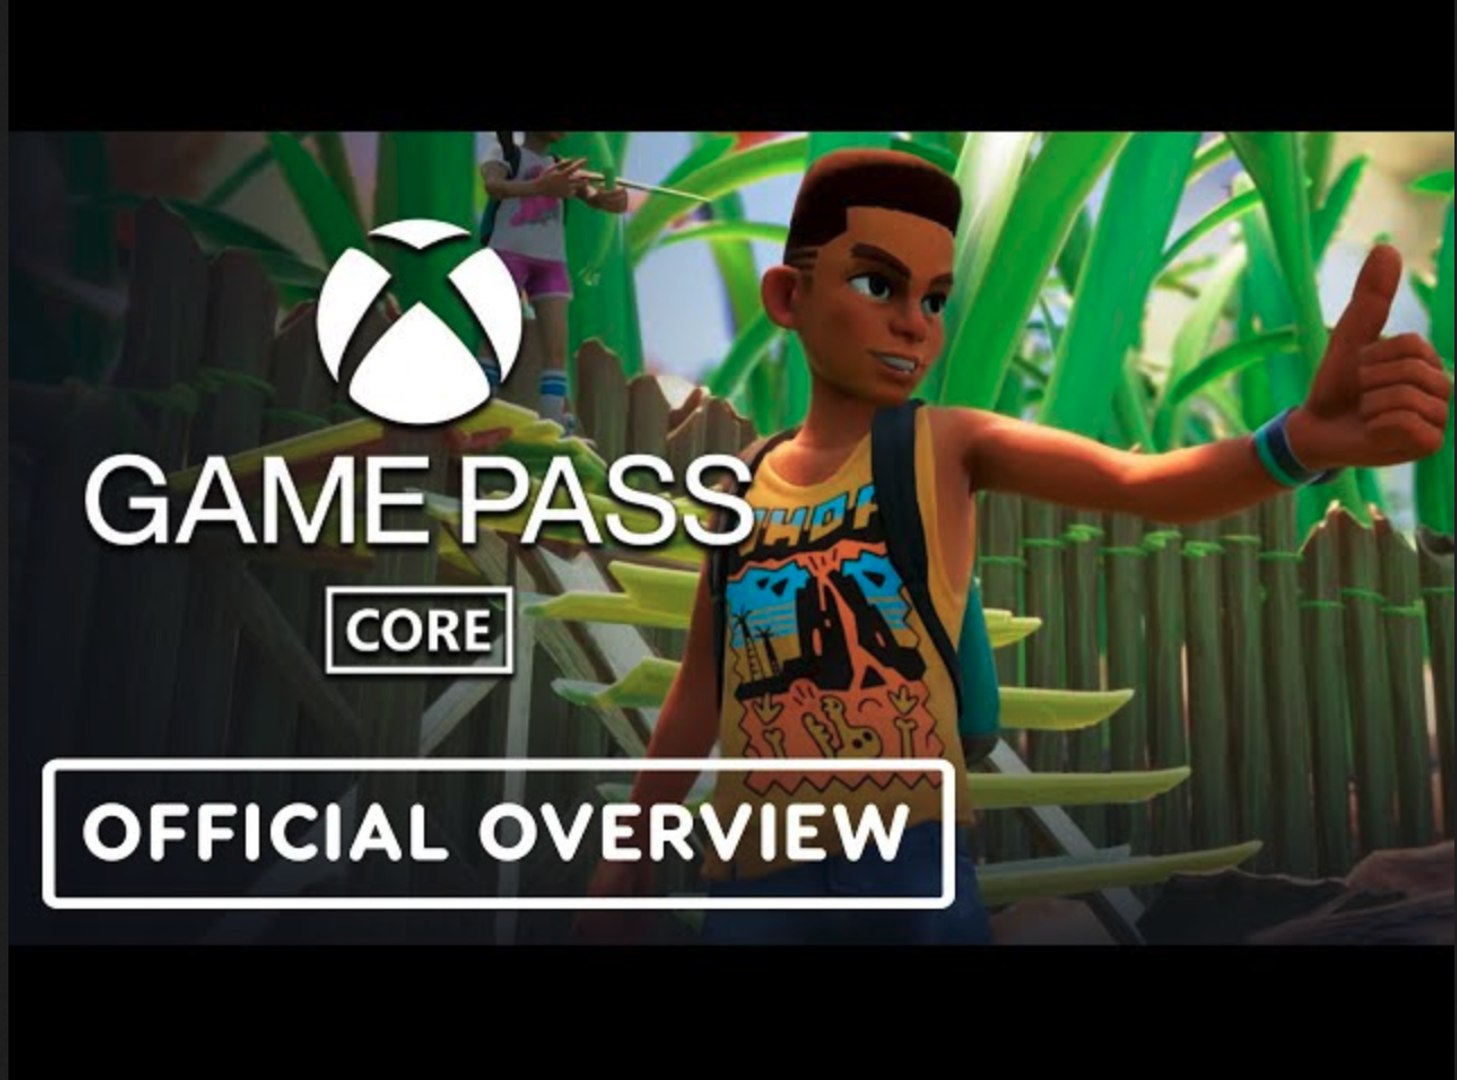 Xbox Game Pass Core officially replaces Xbox Live Gold